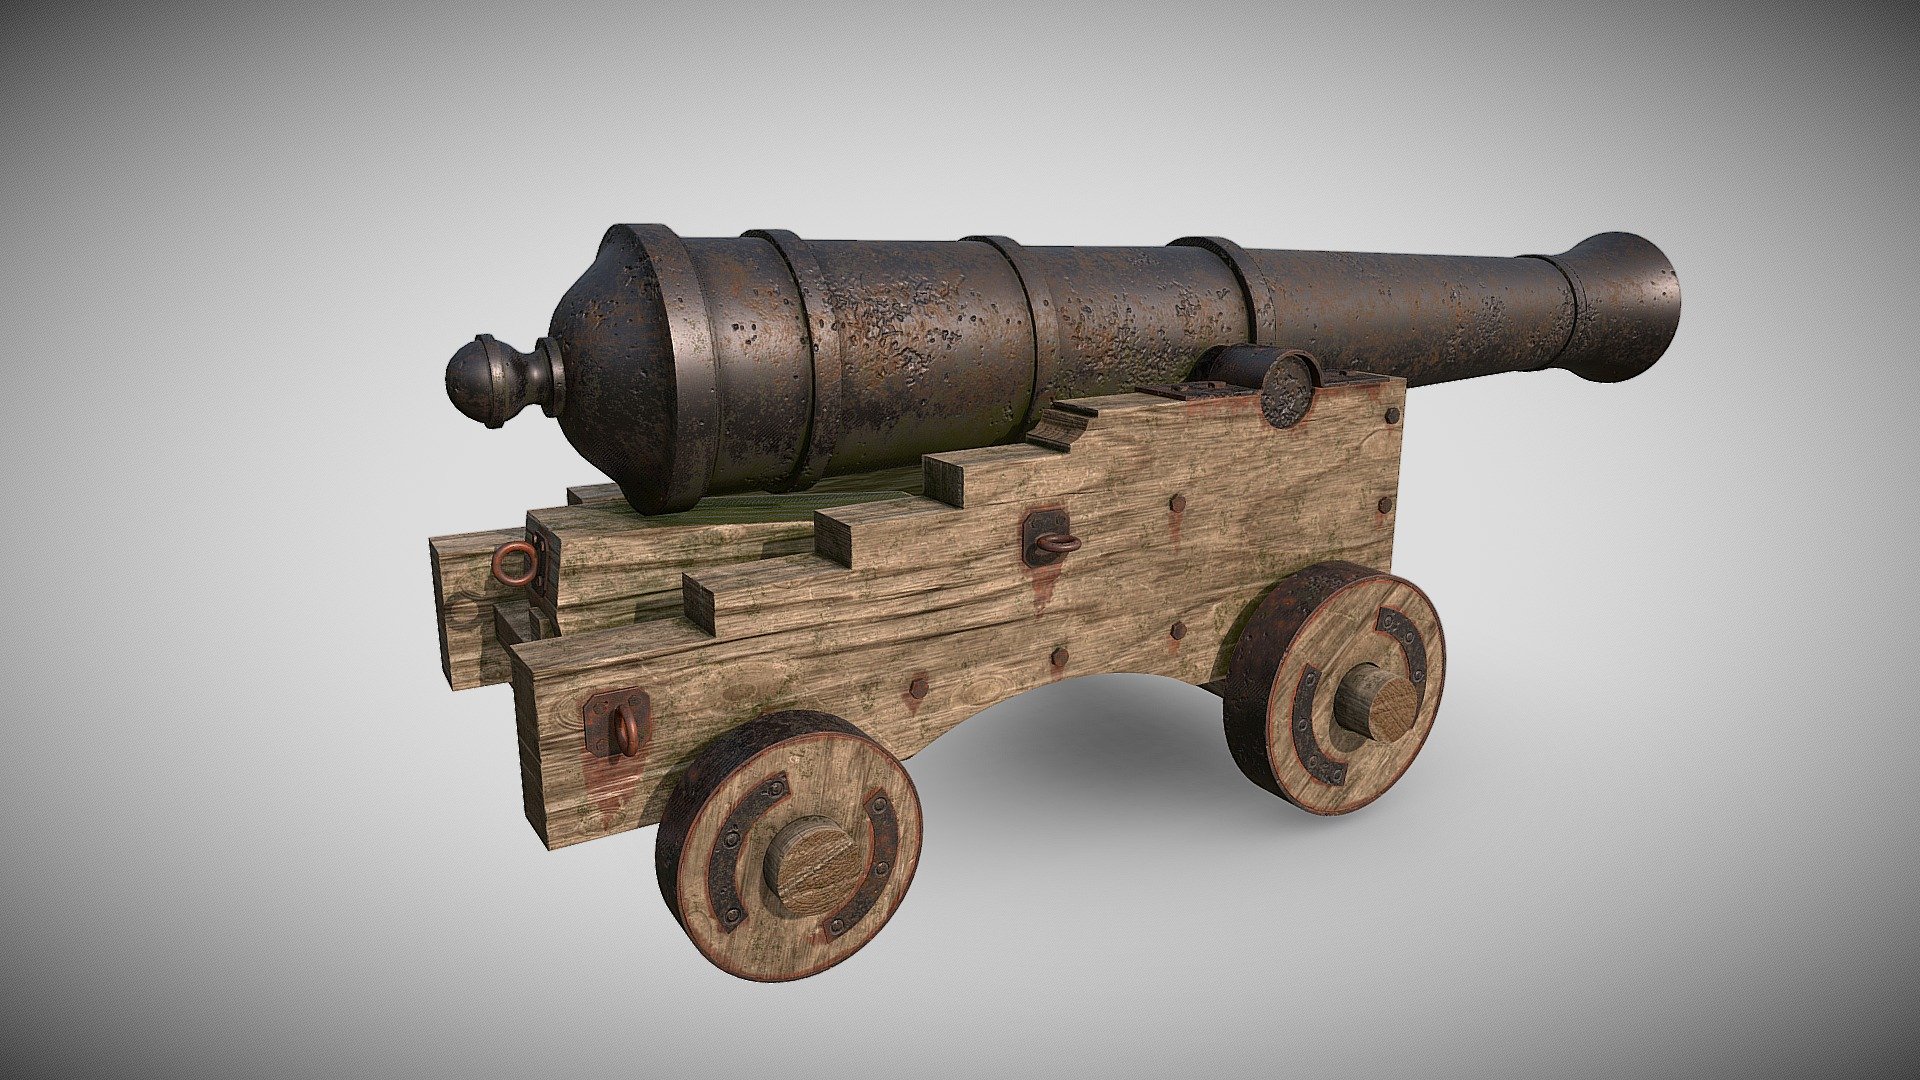 I will create a model for you by following the link
https://kwork.com/animation-3d/22662211/create-a-3d-model?ref=12959150 - Cannon from the end of the seventeenth century - Download Free 3D model by libishoffn 3d model